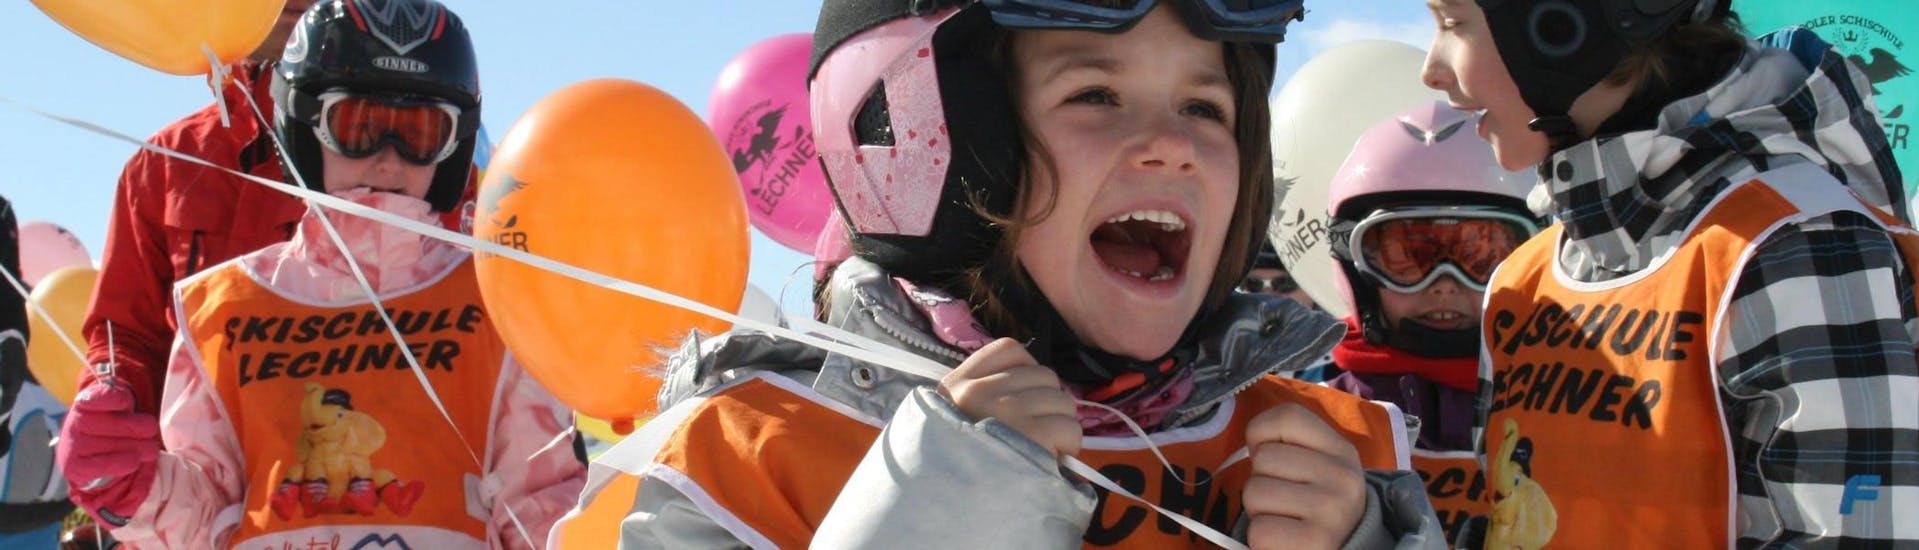 Several children taking part in the Kids Ski Lessons (5-14 years) - Advanced organised by the ski school Skischule Lechner are holding balloons with the ski school's logo printed on them.